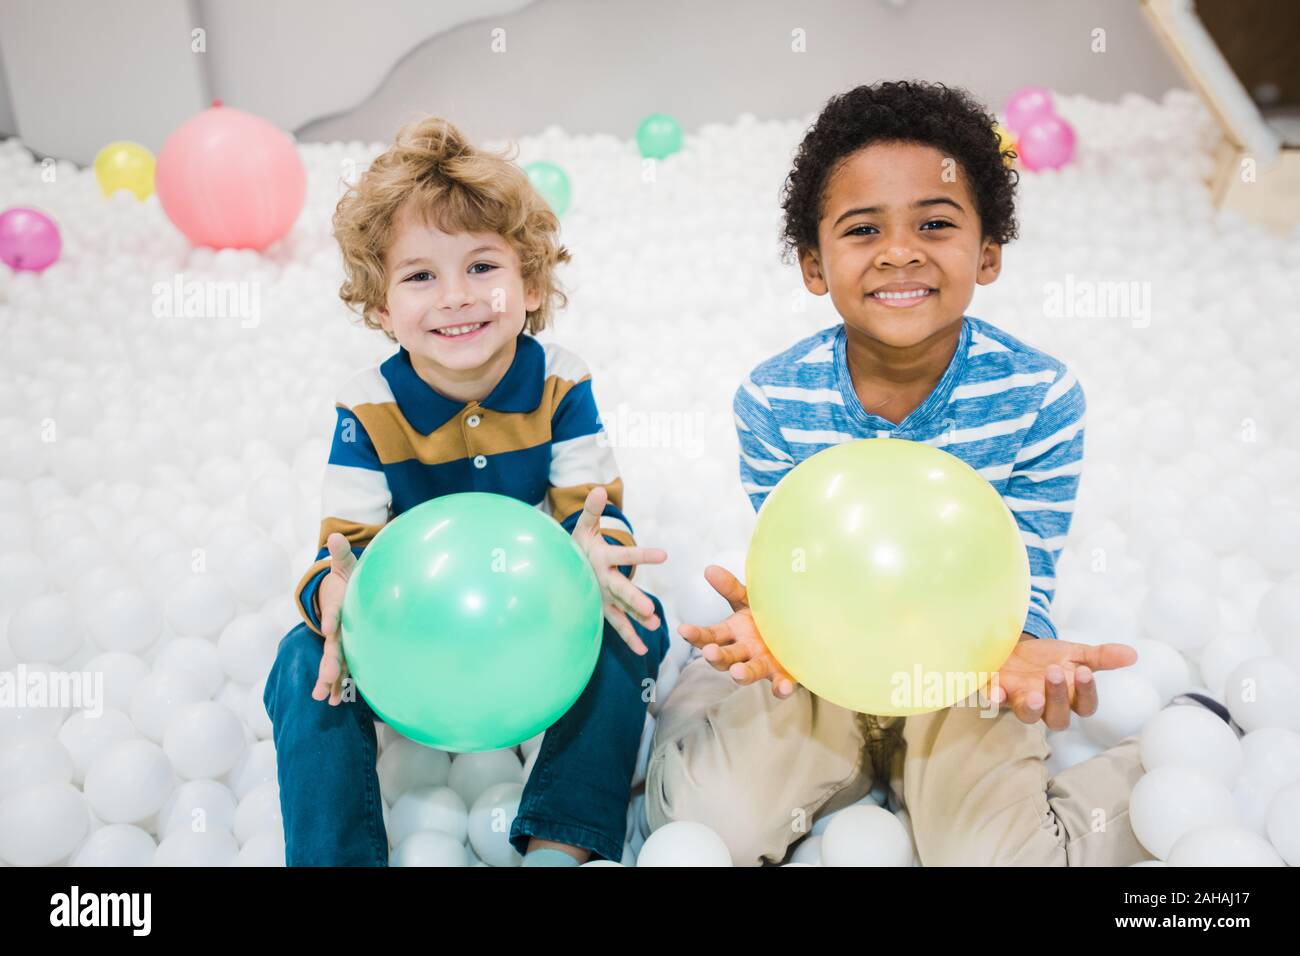 Cute cheerful intercultural little boys in striped shirts playing with balloons Stock Photo